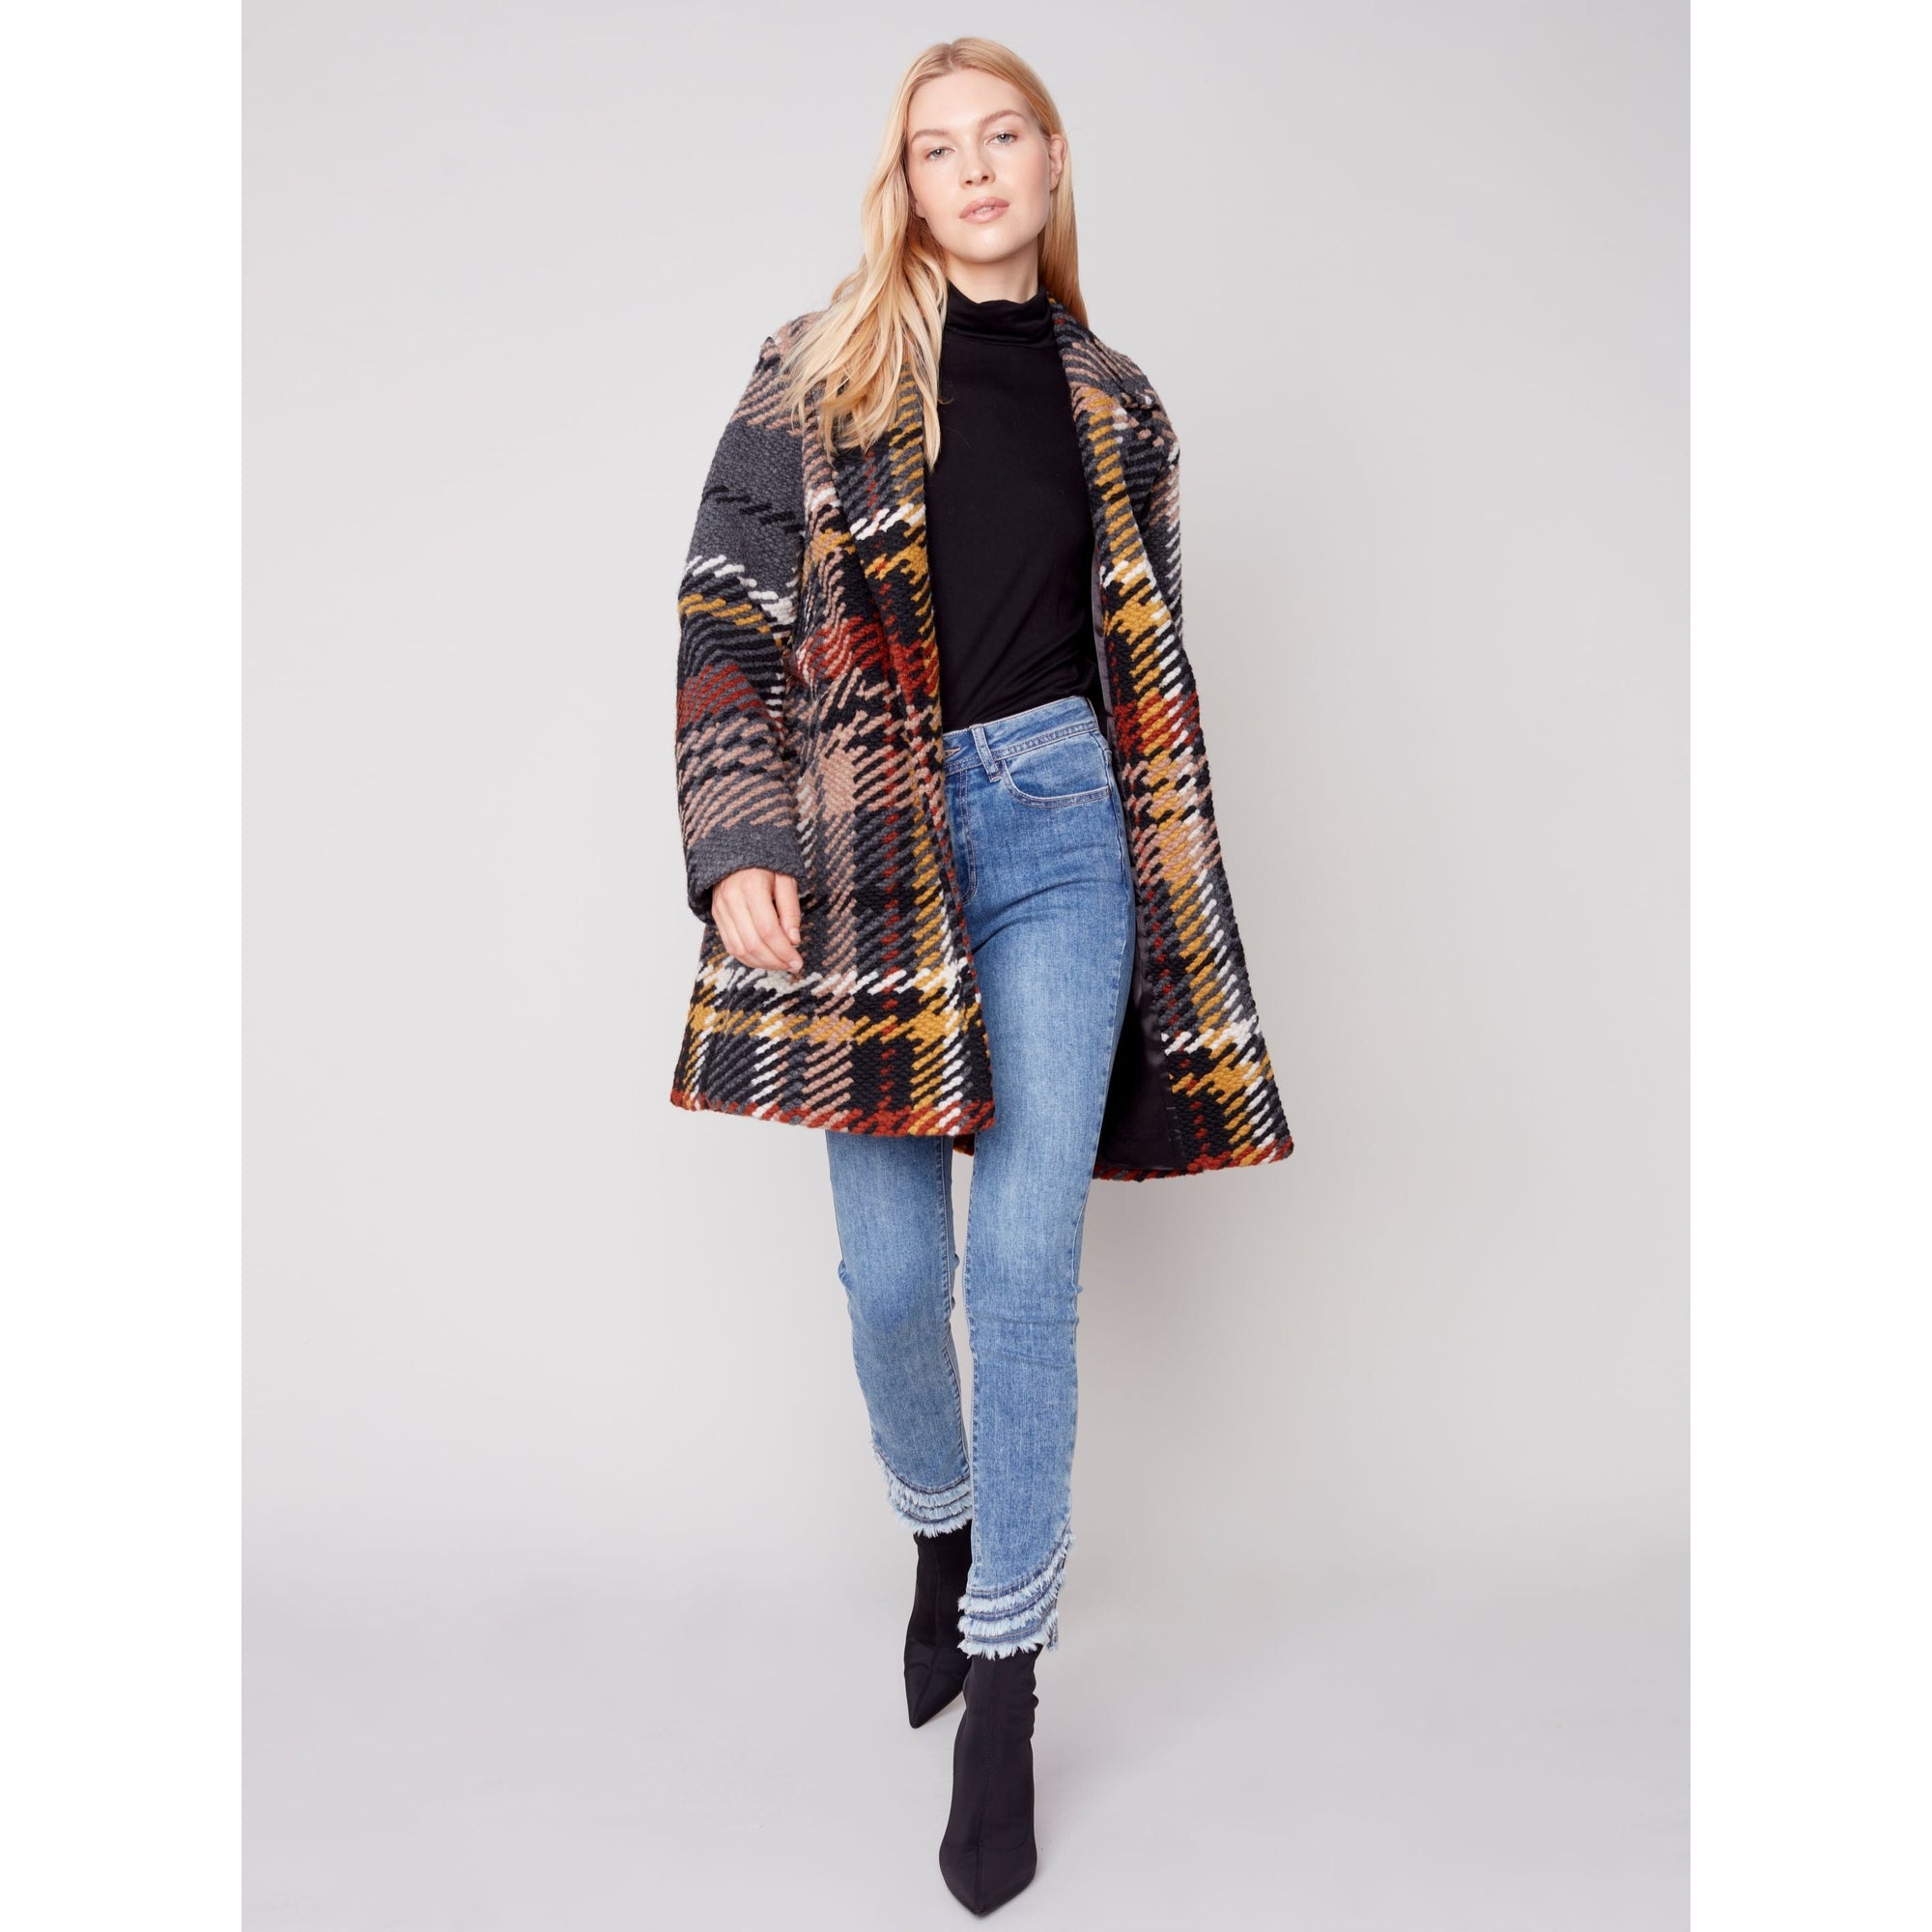 STRAIGHT CUT PLAID COAT - GOLD-Jackets & Sweaters-CHARLIE B-SMALL-GOLD-Coriander